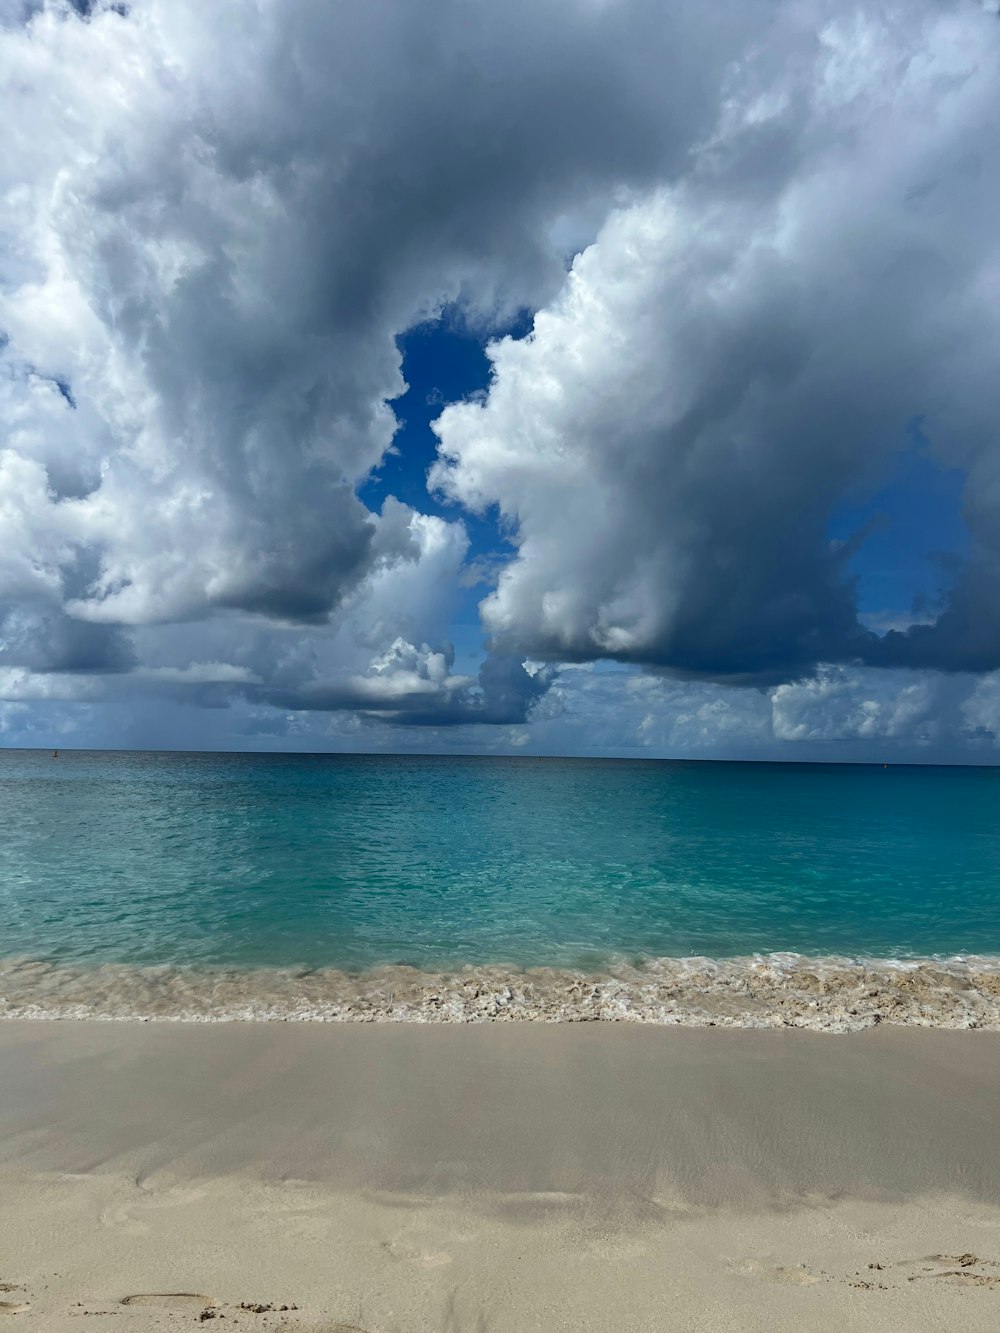 a sandy beach with blue water and clouds in the sky